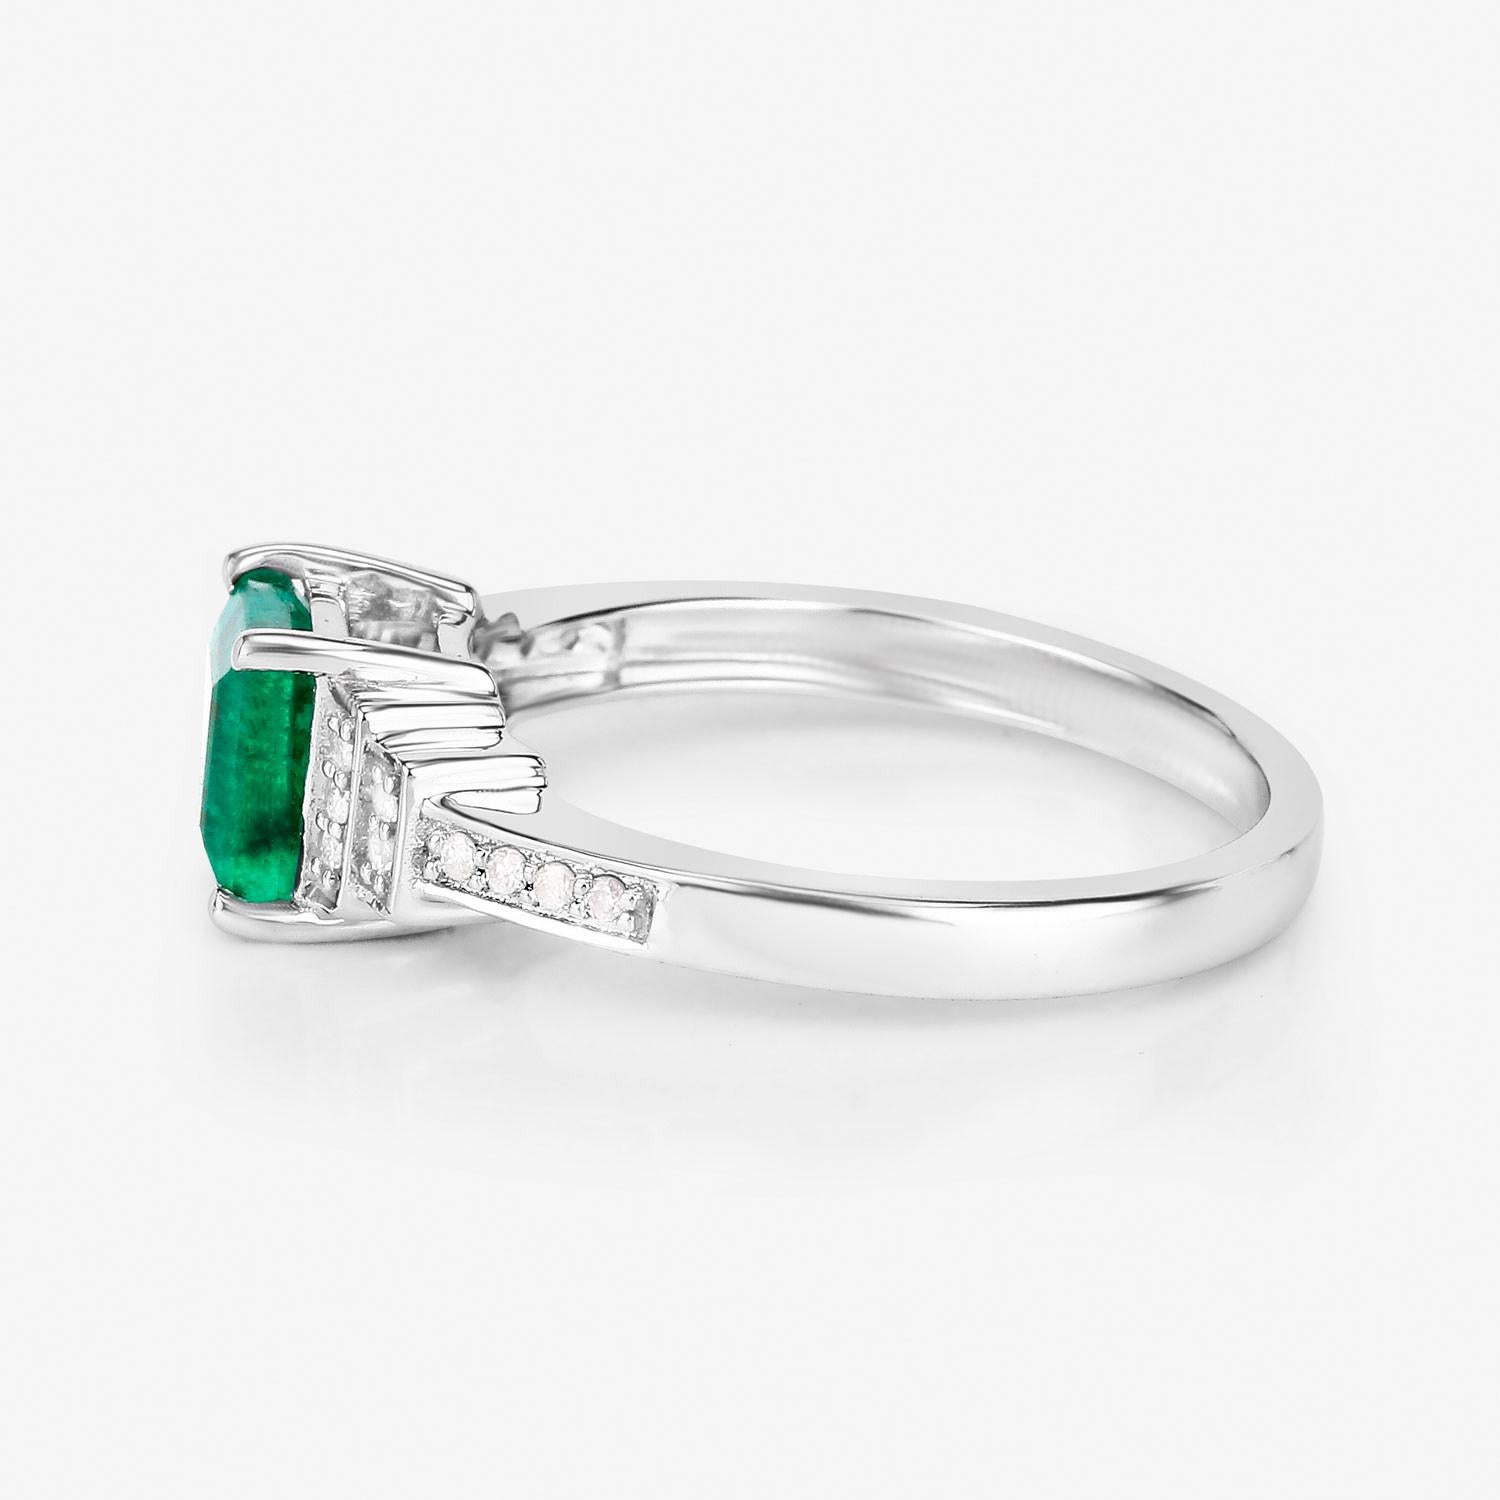 Zambian Emerald Ring With Diamonds 1.09 Carats 14K White Gold In New Condition For Sale In Laguna Niguel, CA